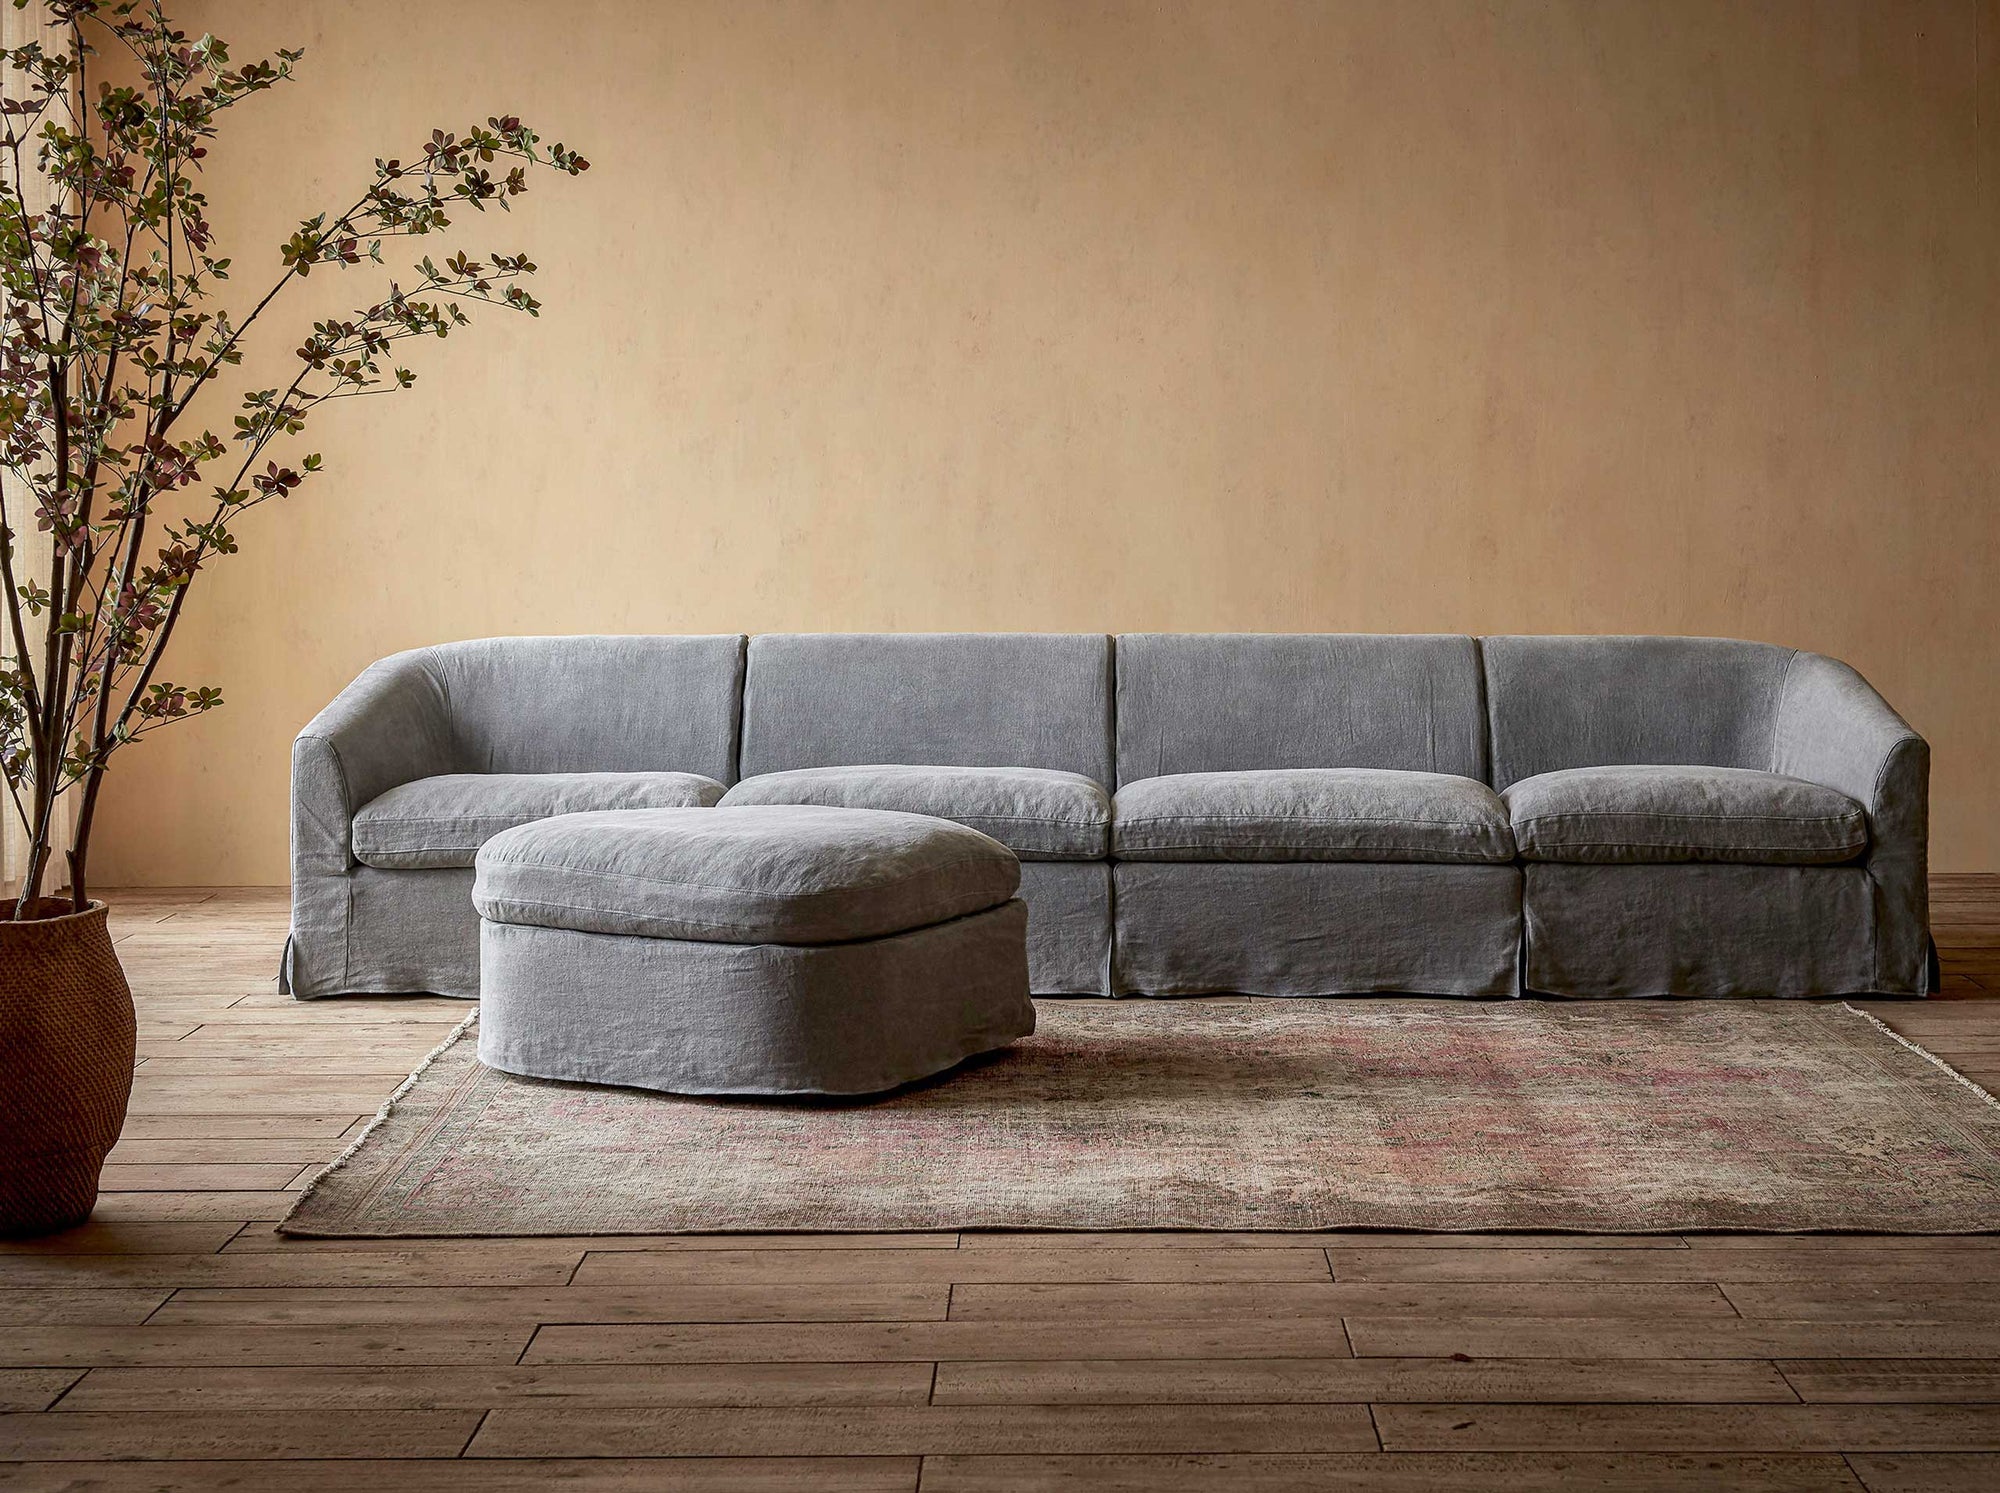 Ziki 5-Piece Chaise Sectional Sofa in Ink Cap, a medium cool grey Light Weight Linen, placed in a room with a floor plant